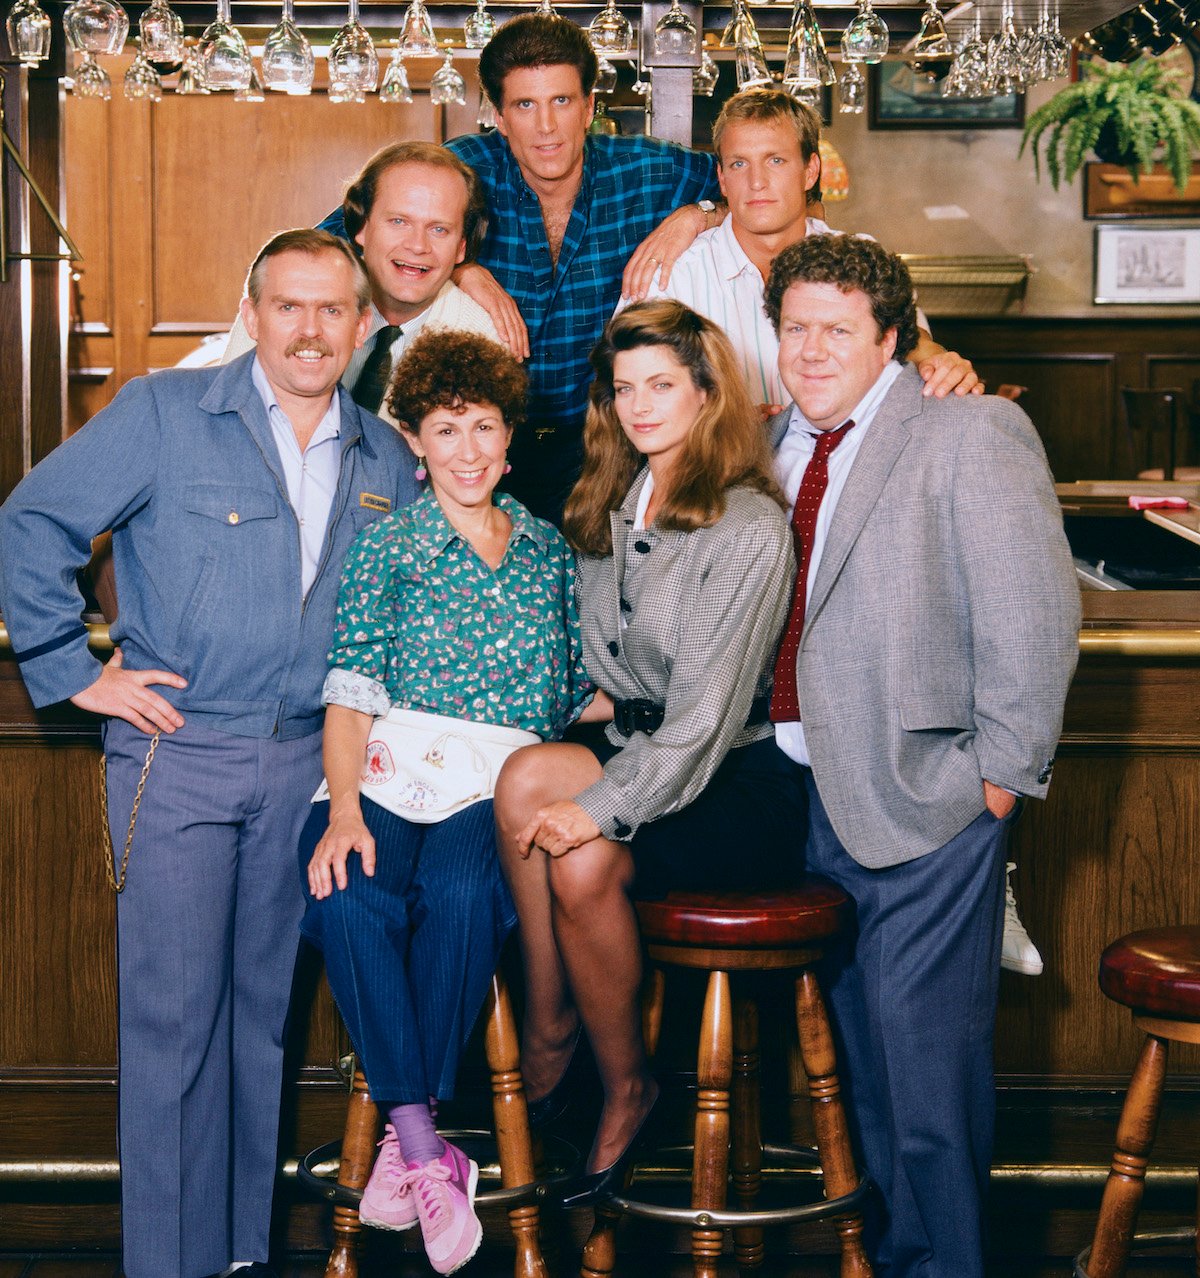 1 ‘Cheers’ Episode Was ‘the Scariest Night of My Life’ to Writer Ken Levine